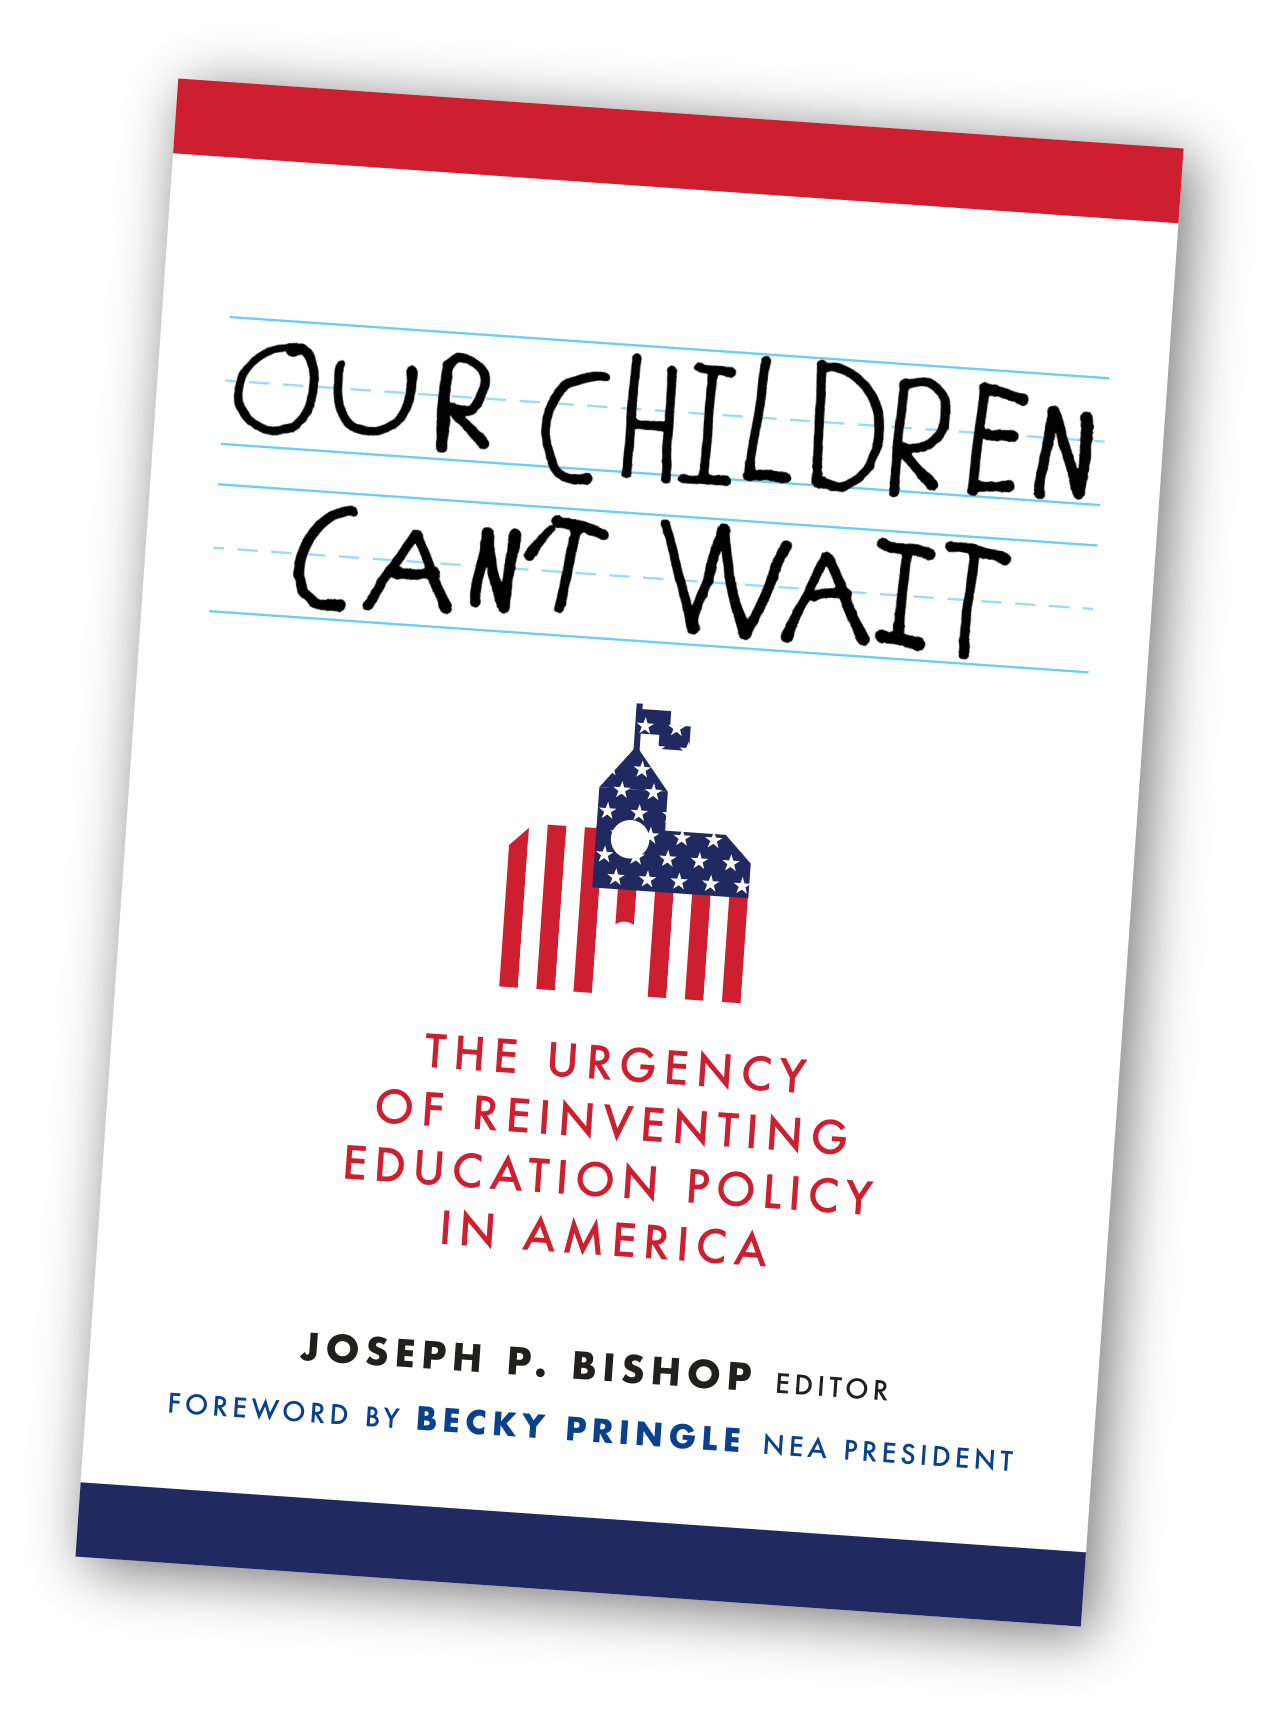 Our Children Can’t Wait: The Urgency of Reinventing Education Policy in America; Joseph P. Bishop, Editor; Foreword by Becky Pringle, NEA President